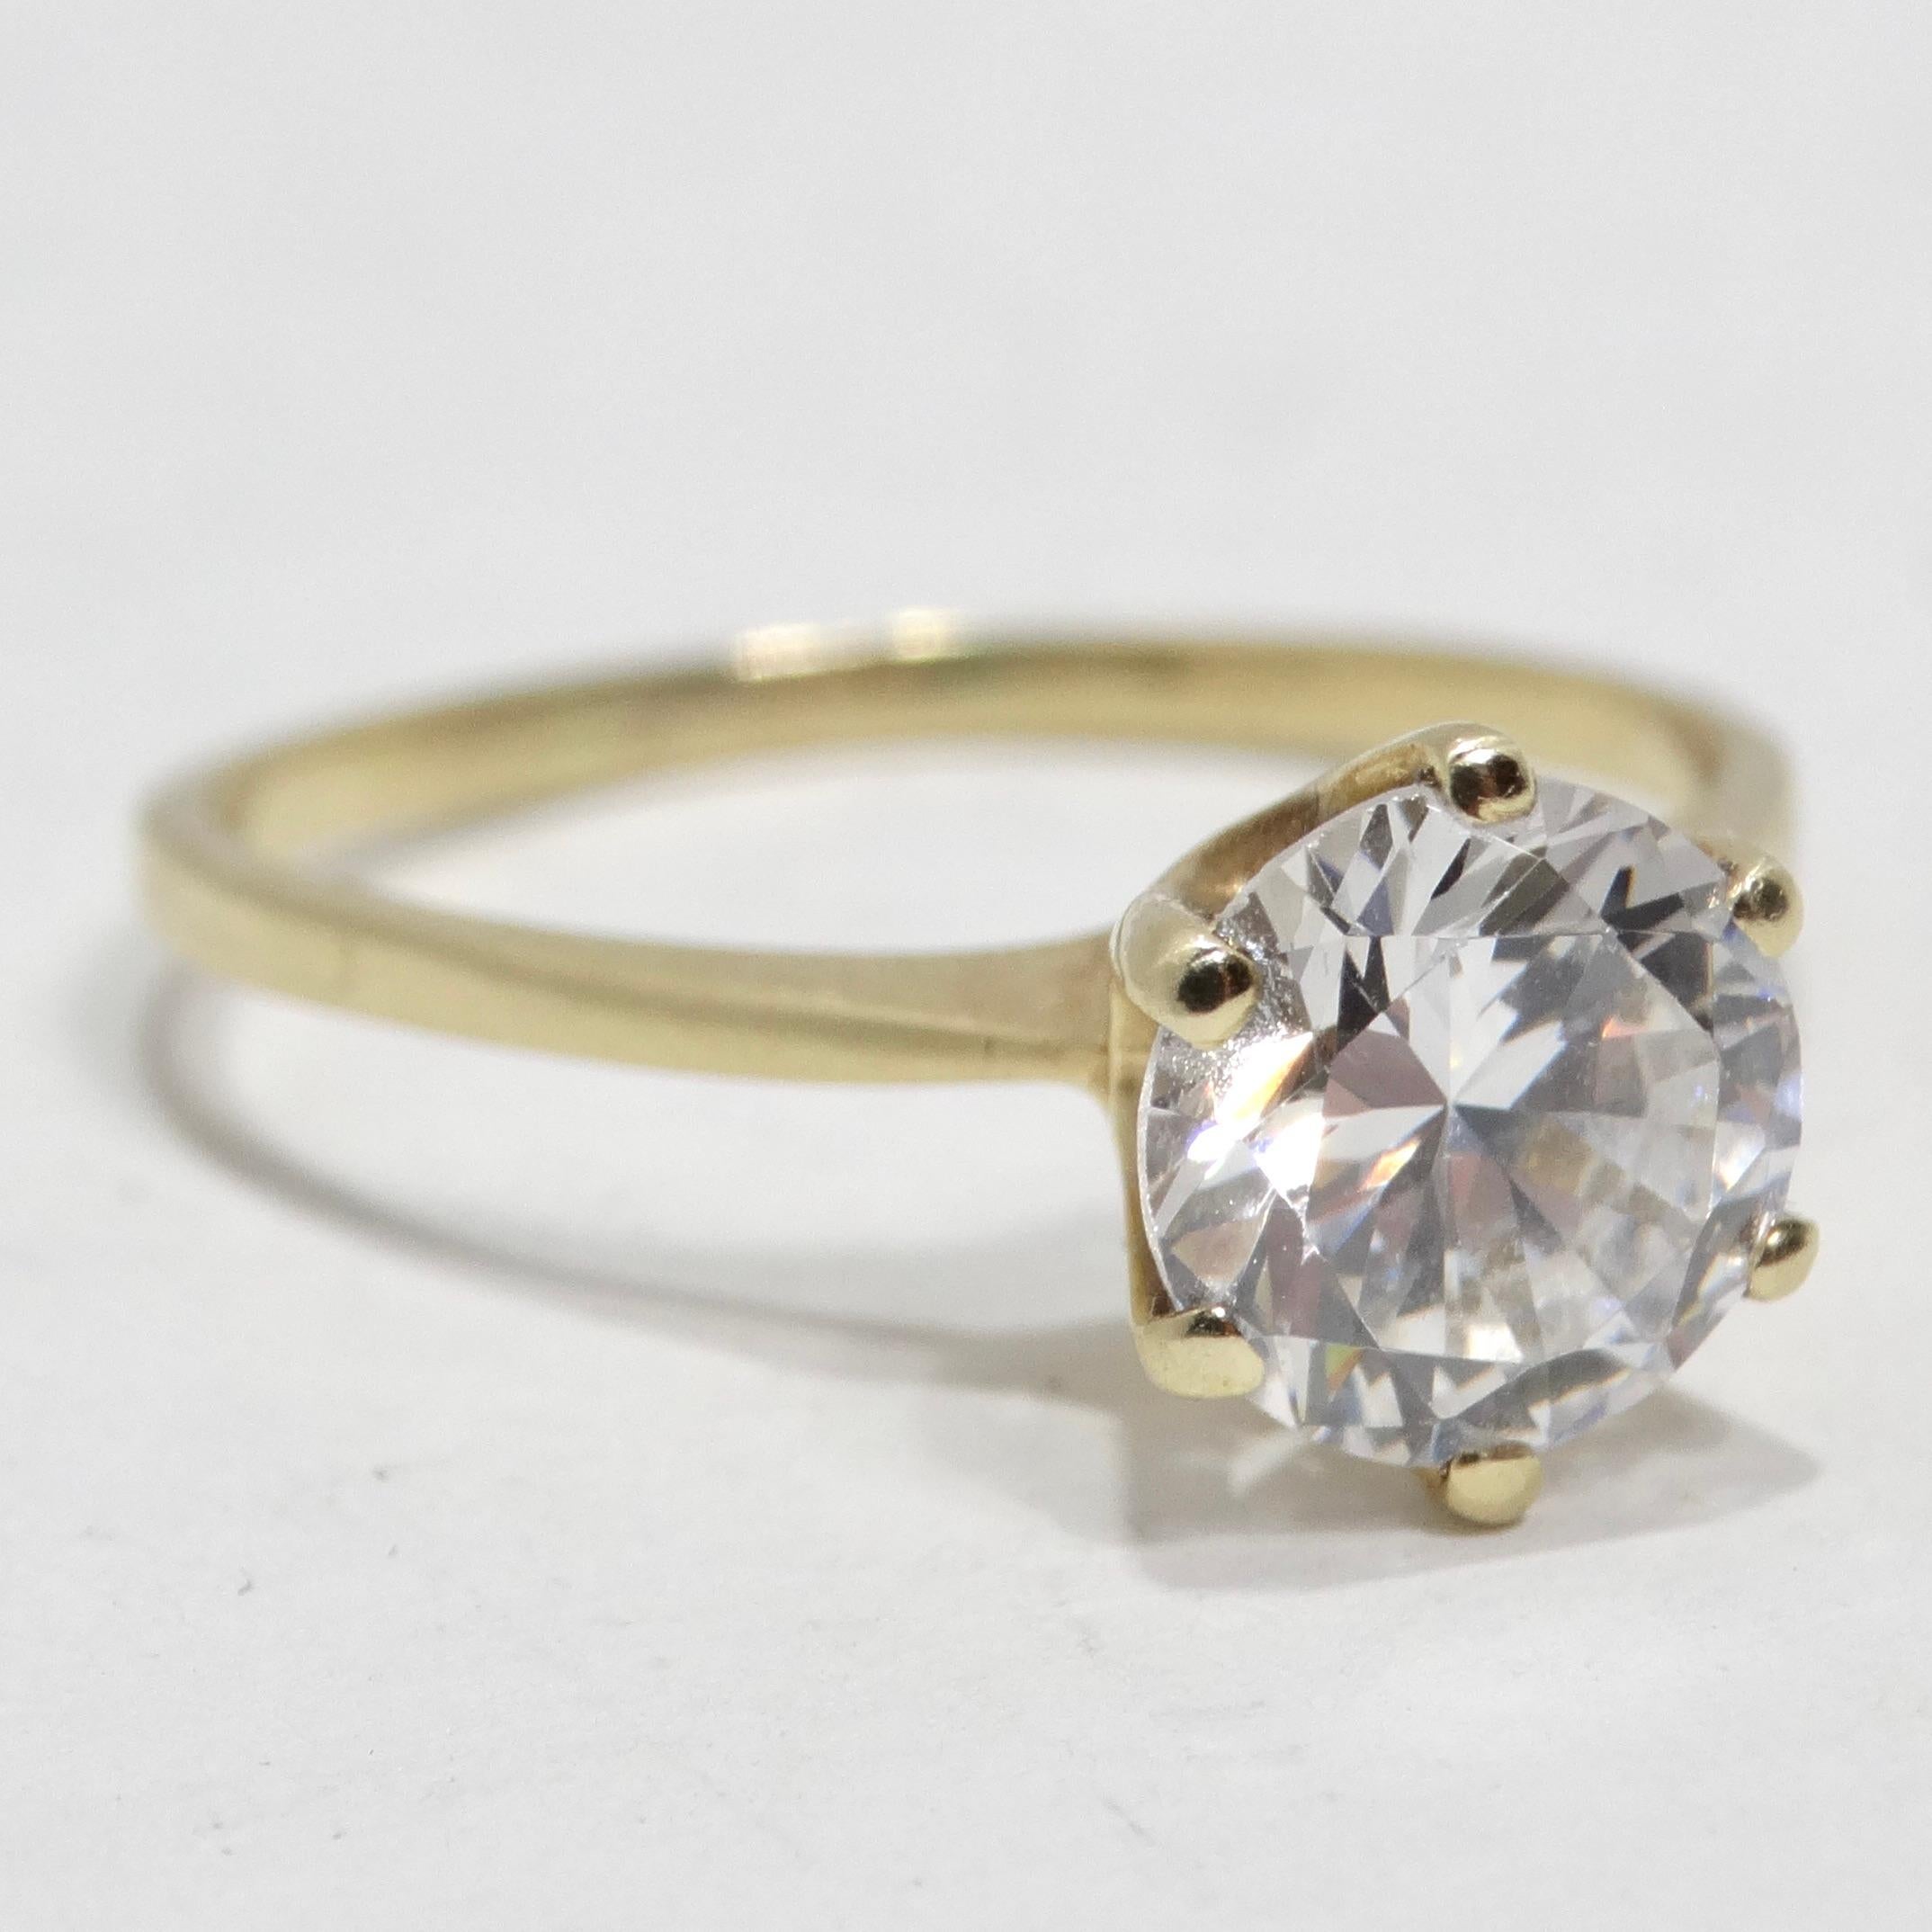 Introducing a ring that encapsulates the essence of timeless romance - the 14K Yellow Gold 1980s Cubic Zirconia Engagement Ring. This beautiful classic engagement ring boasts a subtle 14K yellow gold band that gracefully complements a stunning clear